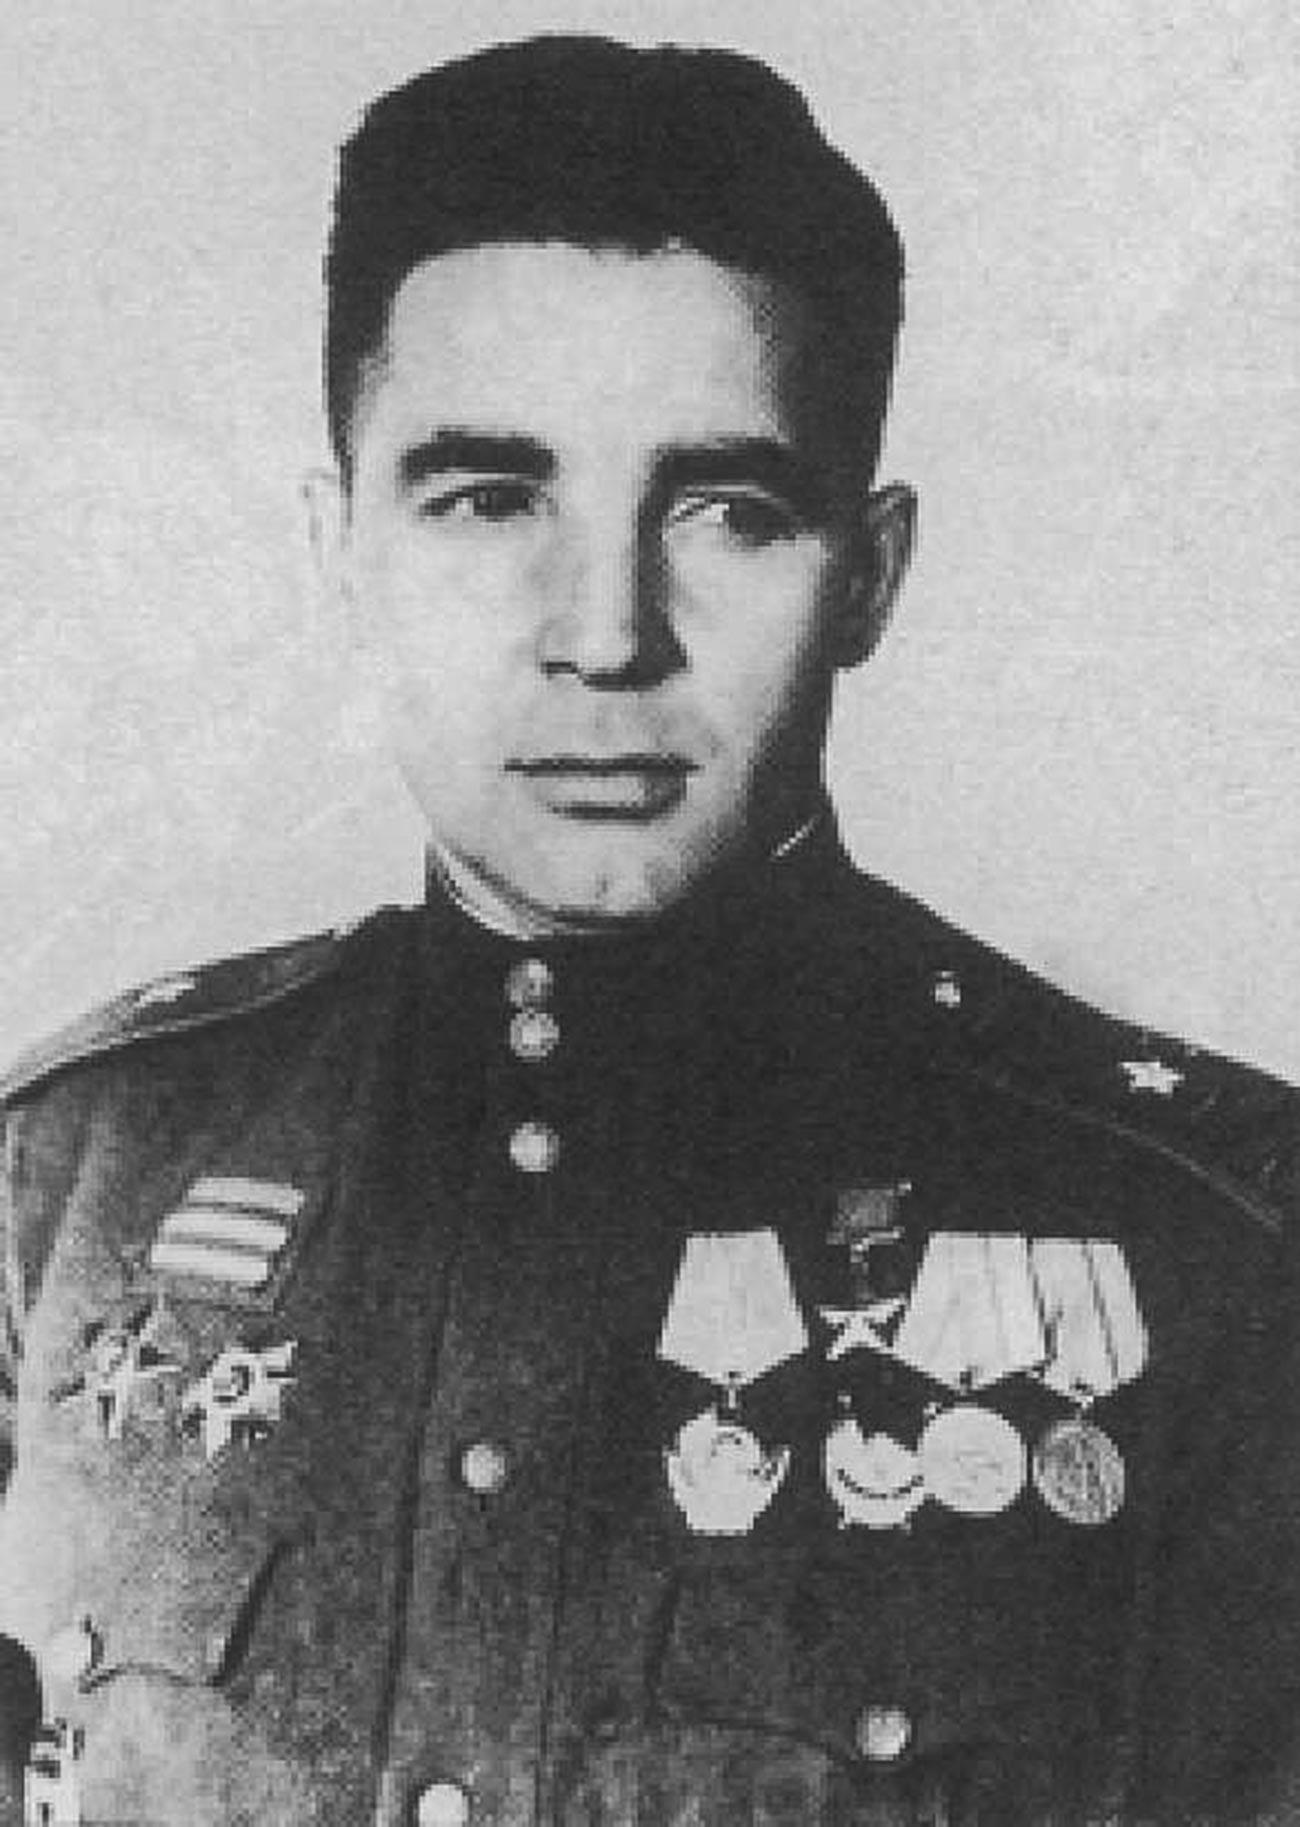 Margelov during WWII.